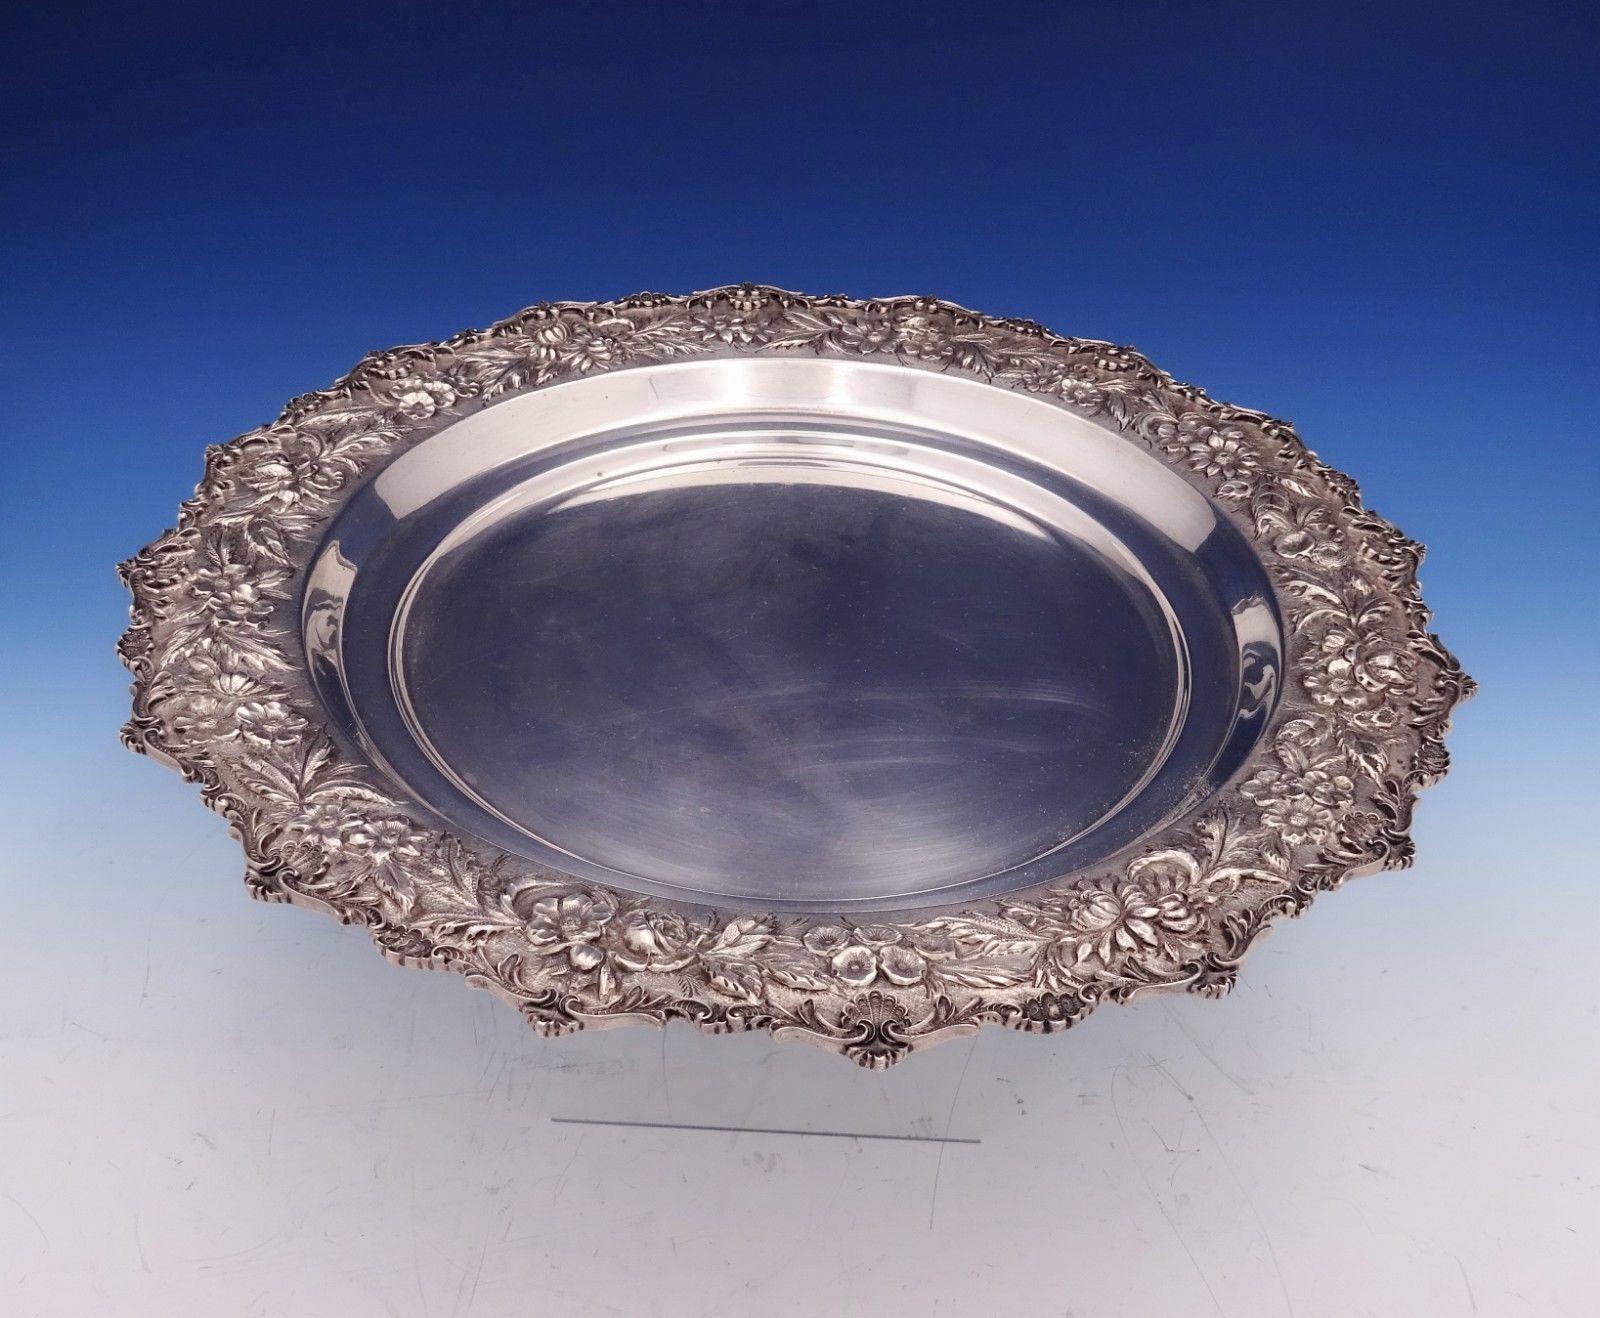 Repousse by Kirk sterling silver round tray marked #2544 hand decorated. This piece measures 1 1/8 x 13 1/2 in diameter and weighs 33 troy ounces. It is not monogrammed and is in excellent condition. Pretty scalloped edge!
